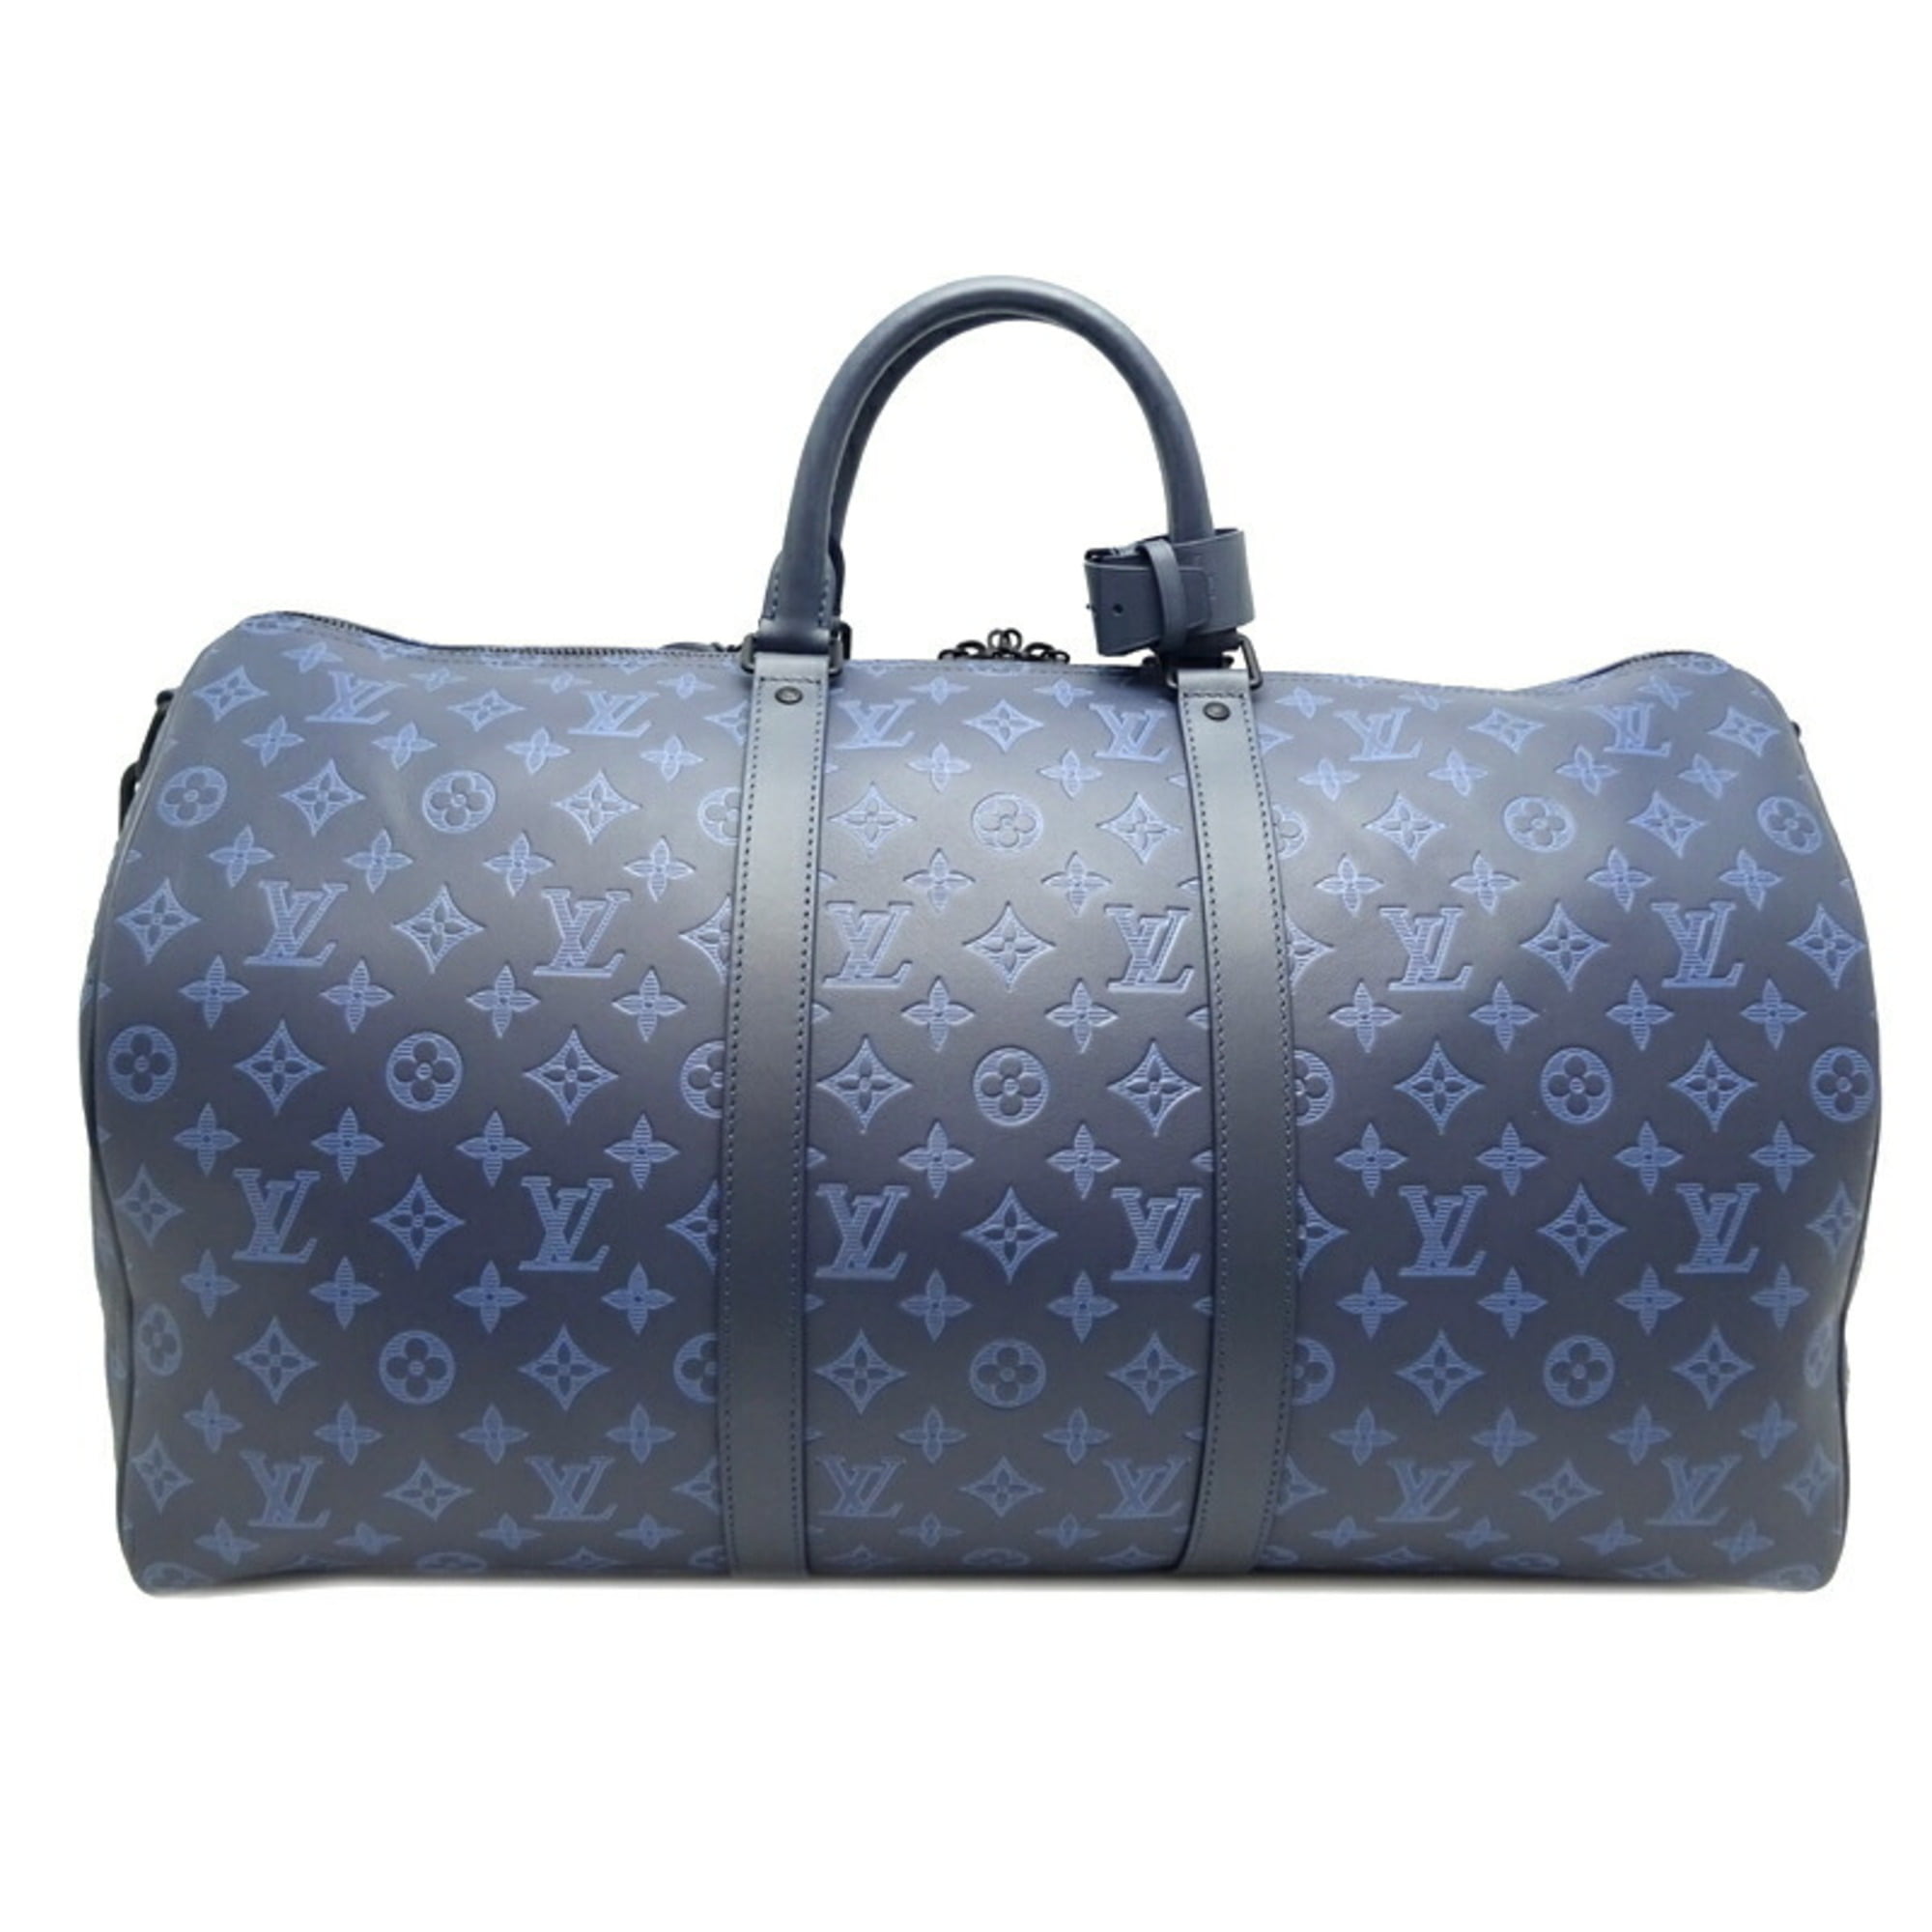 LOUIS VUITTON LV Keepall Bandouliere 50 Used Boston Bag Gray Ombre